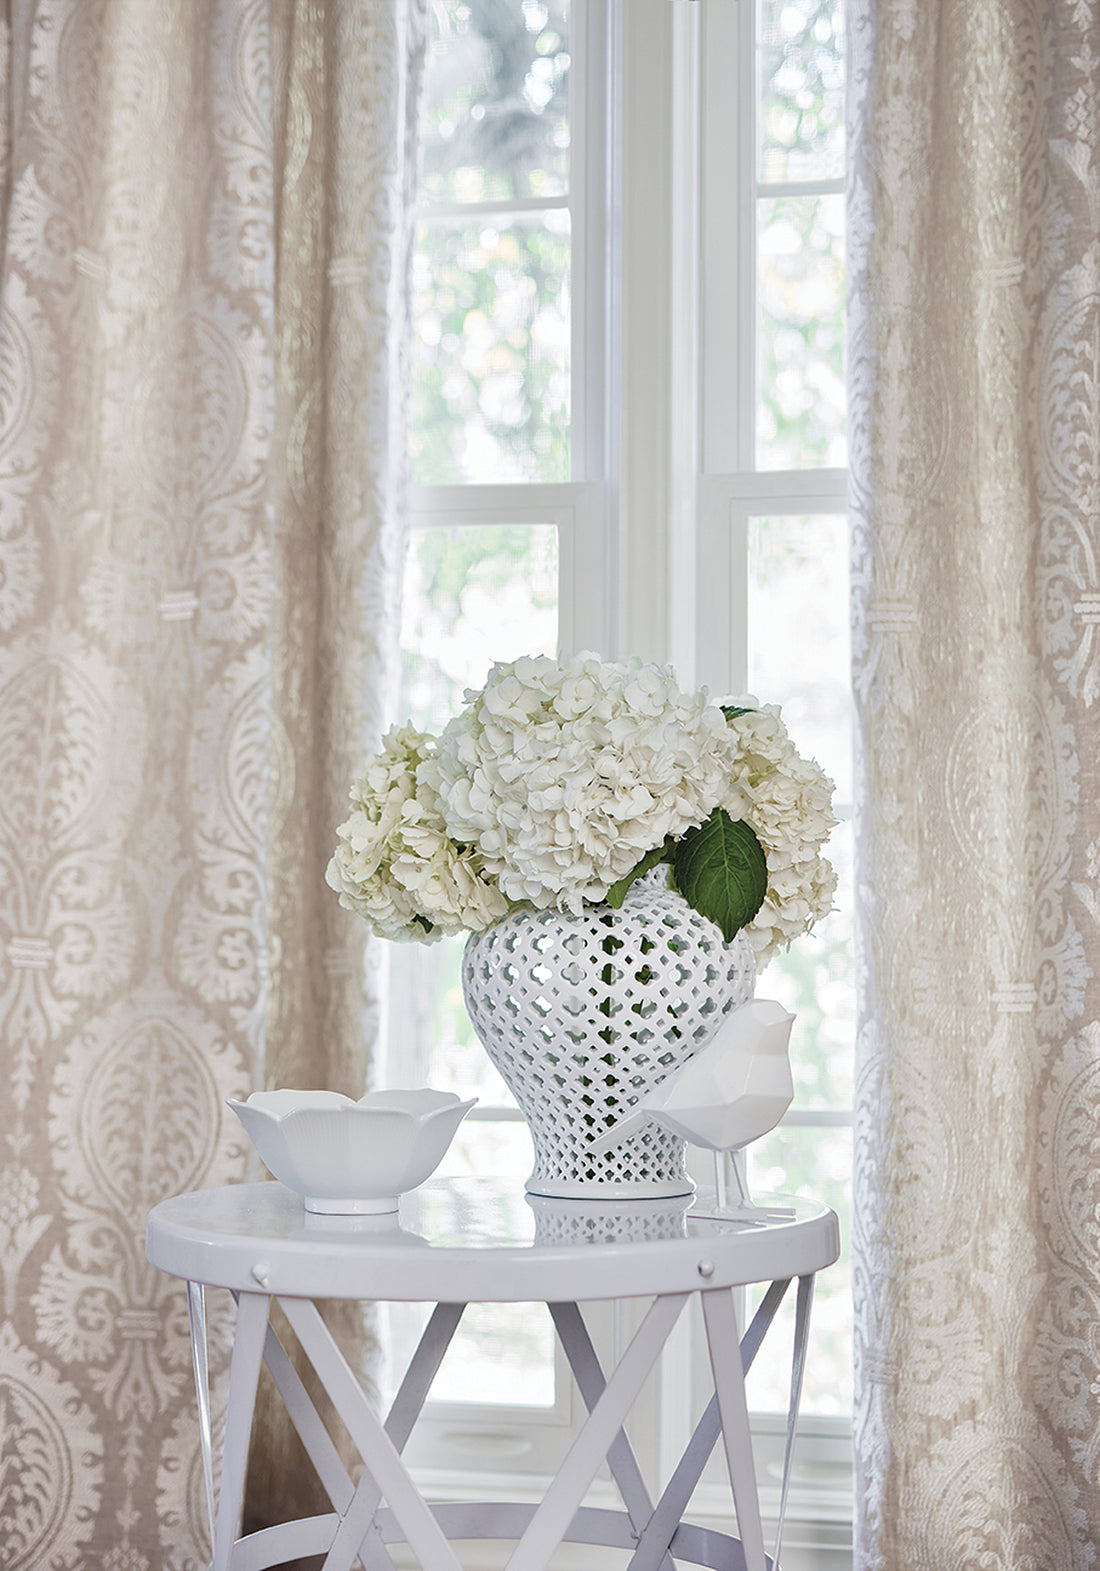 Sir Thomas Embroidery woven fabric in flax color - pattern number W772569 by Thibaut in the Chestnut Hill collection